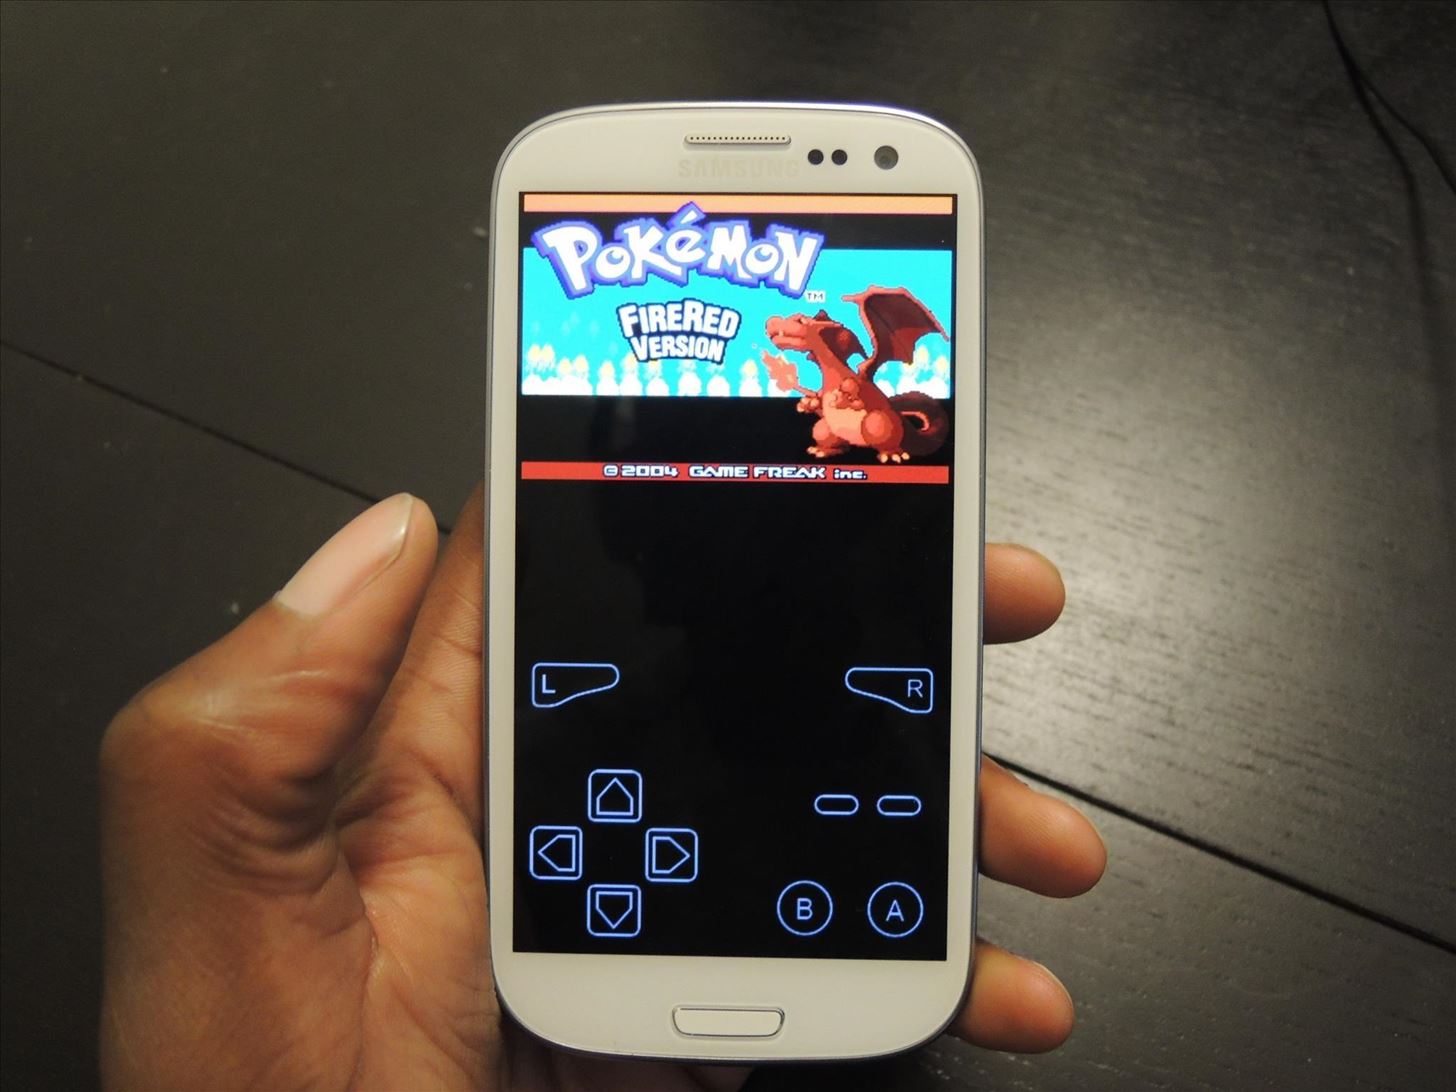 How to Play Pokémon FireRed & Other Game Boy Advance Games on Your Samsung Galaxy S3